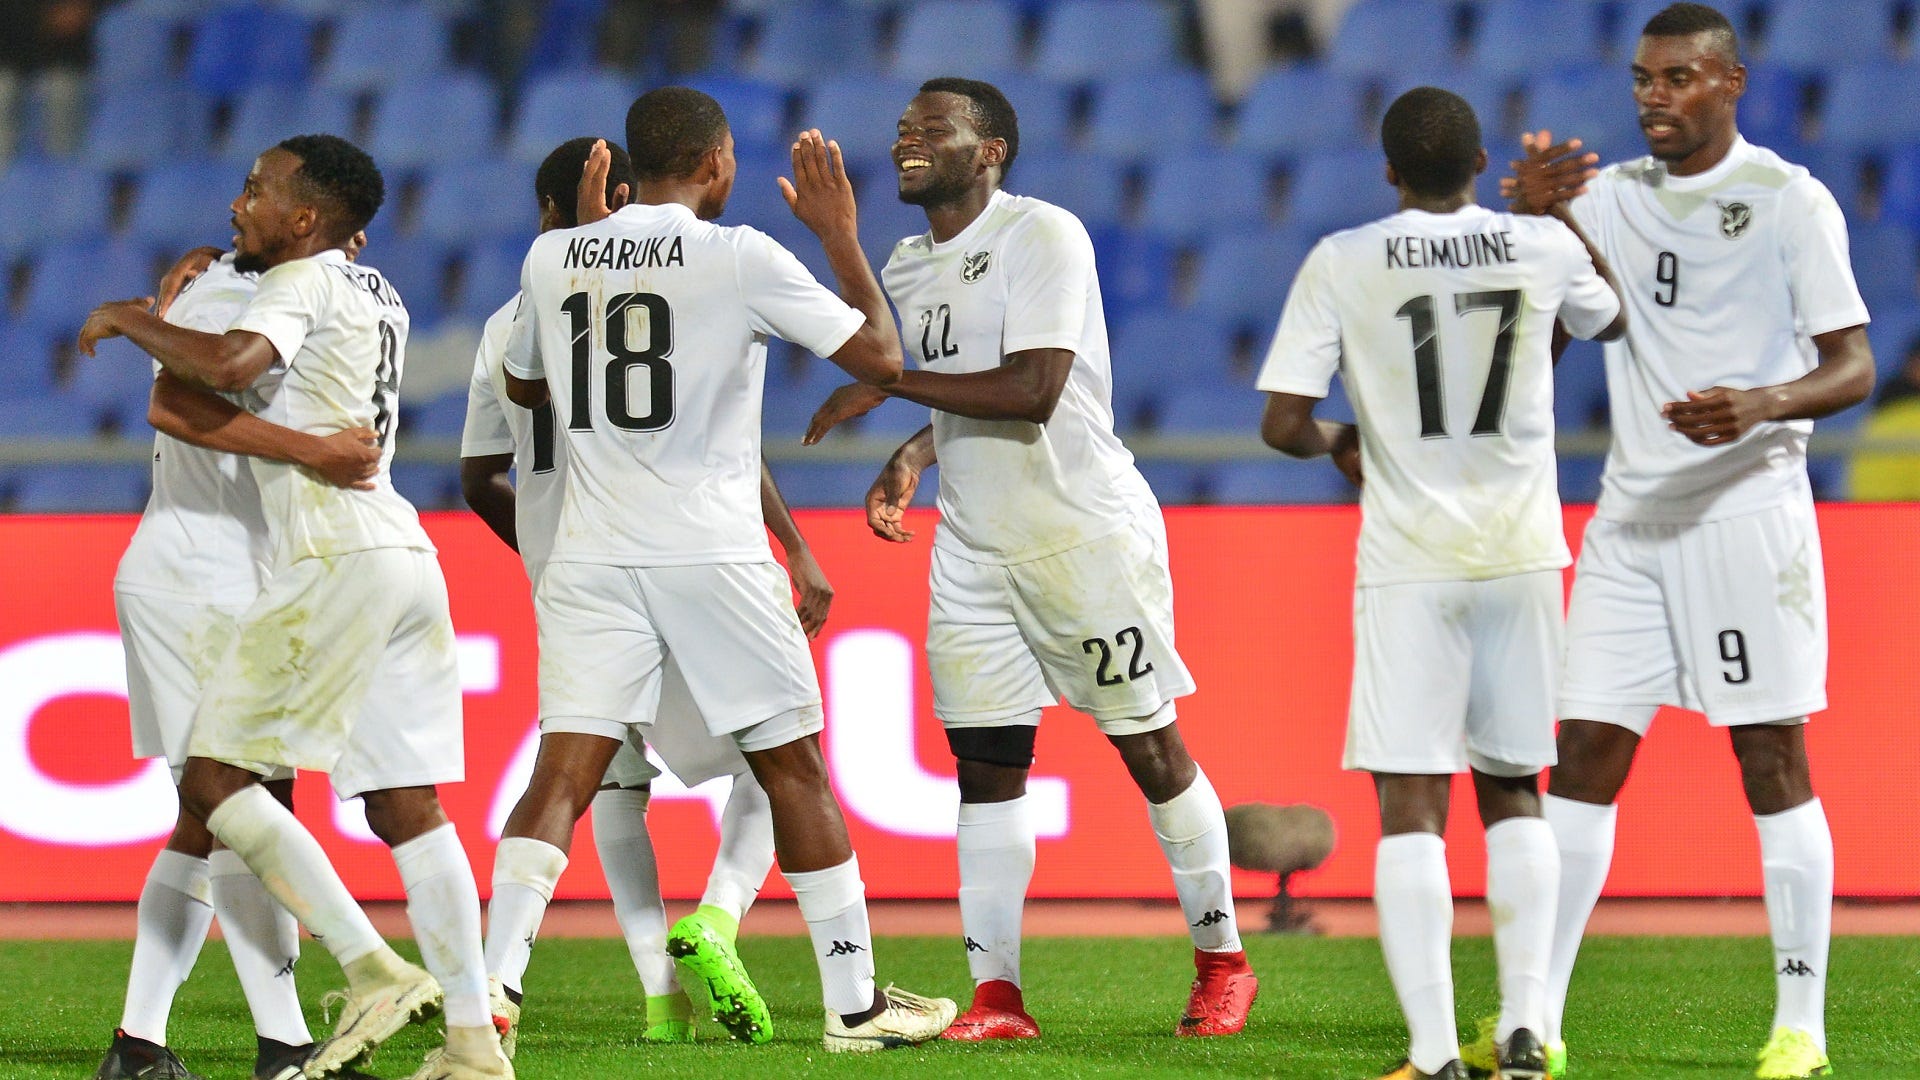 Namibia celebrate a goal during CHAN 2018